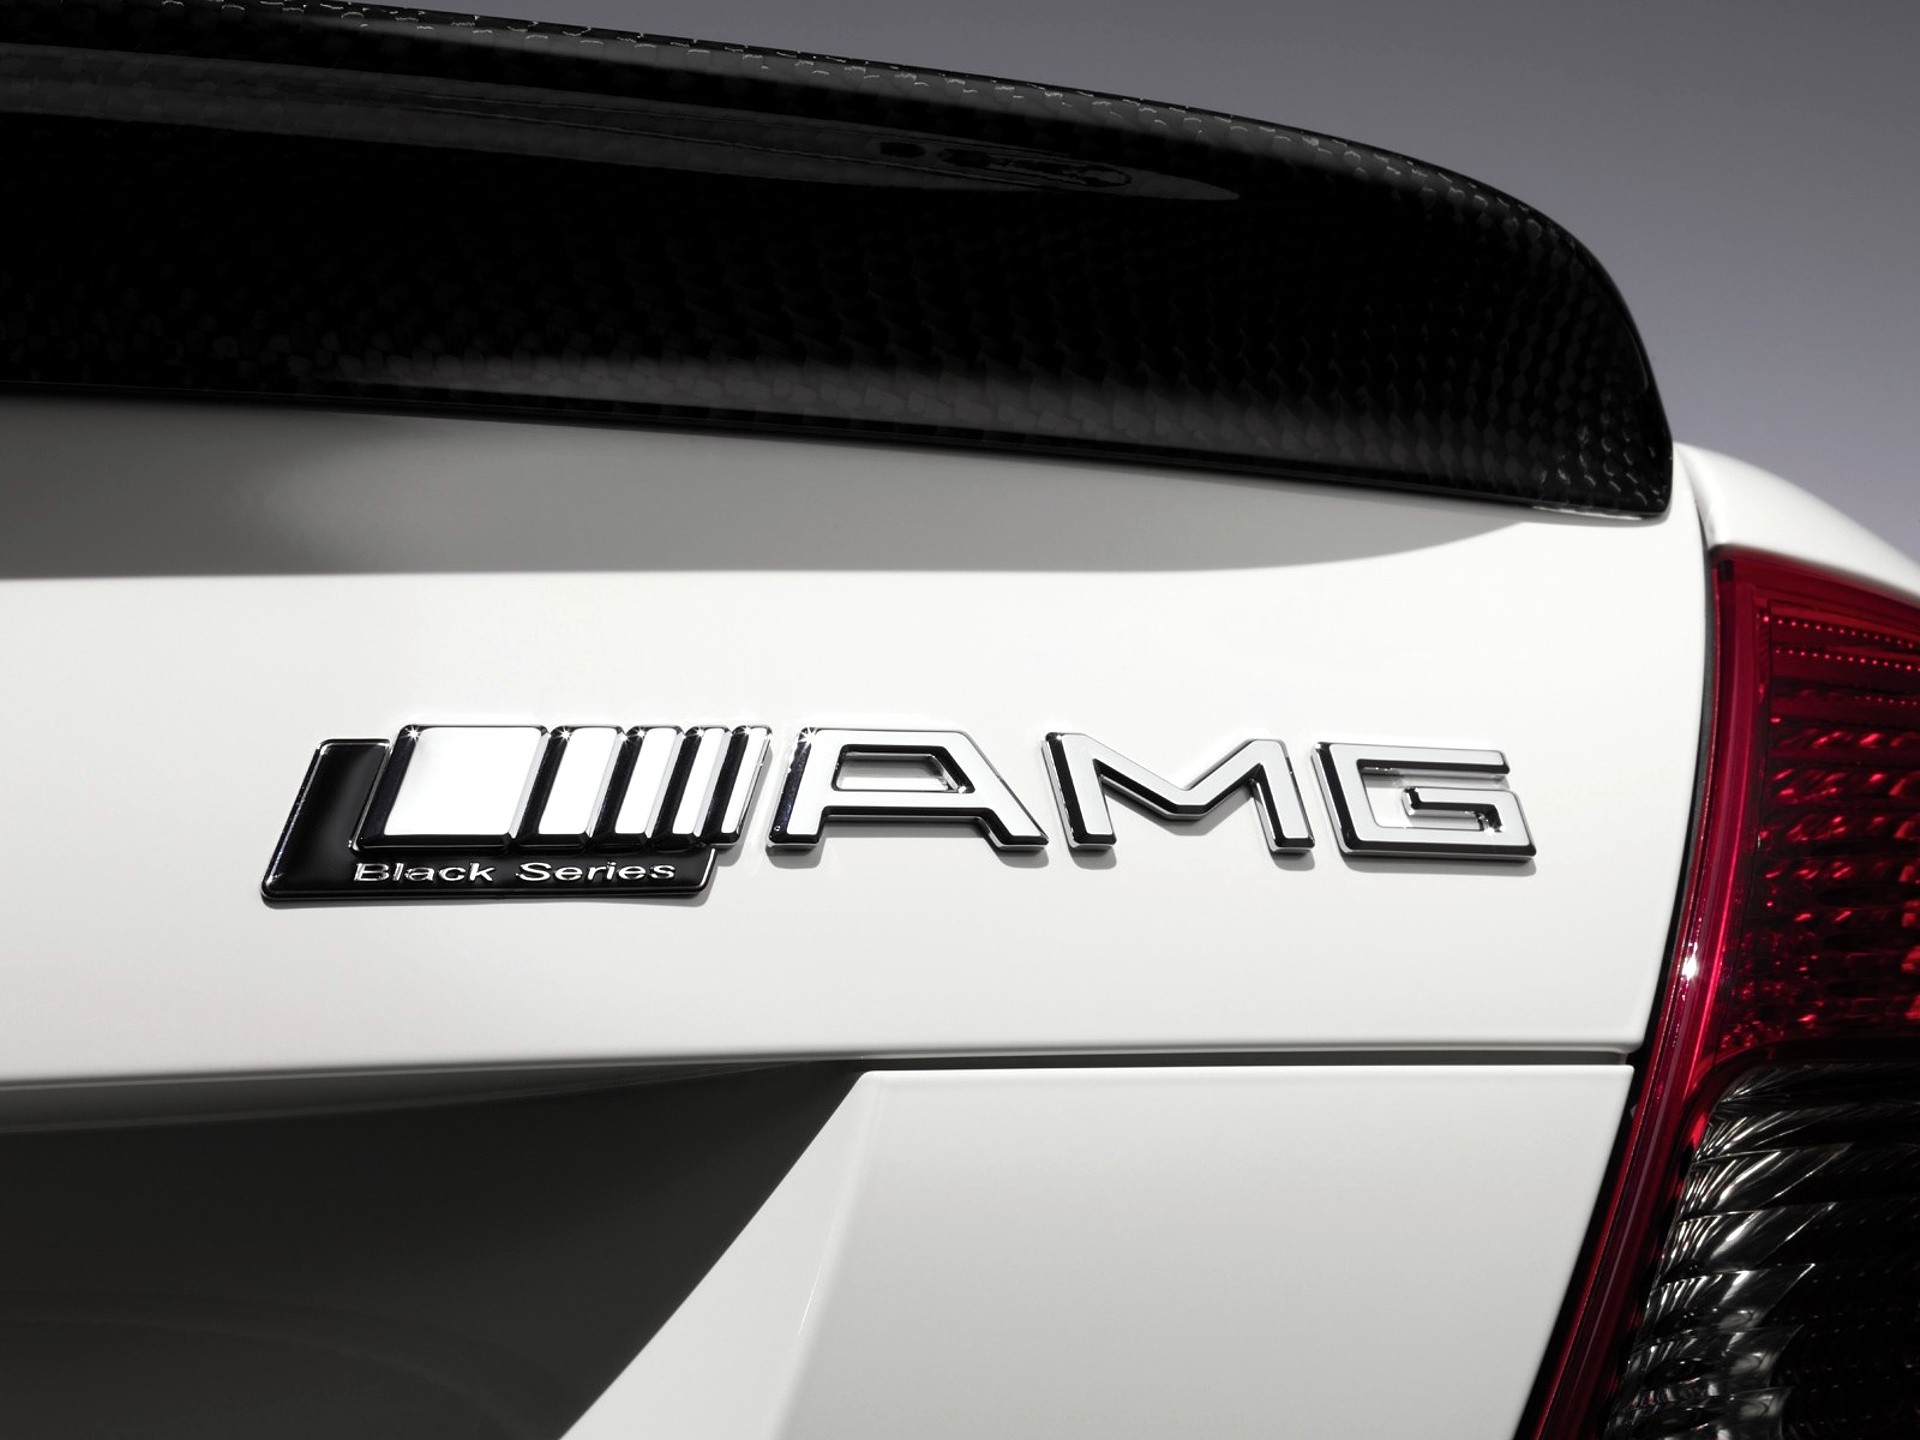 Mercedes AMG logo wallpapers from www.yours-cars.eu | Hd Wallpapers Cars |  Pinterest | Mercedes AMG, Cars and Dream cars